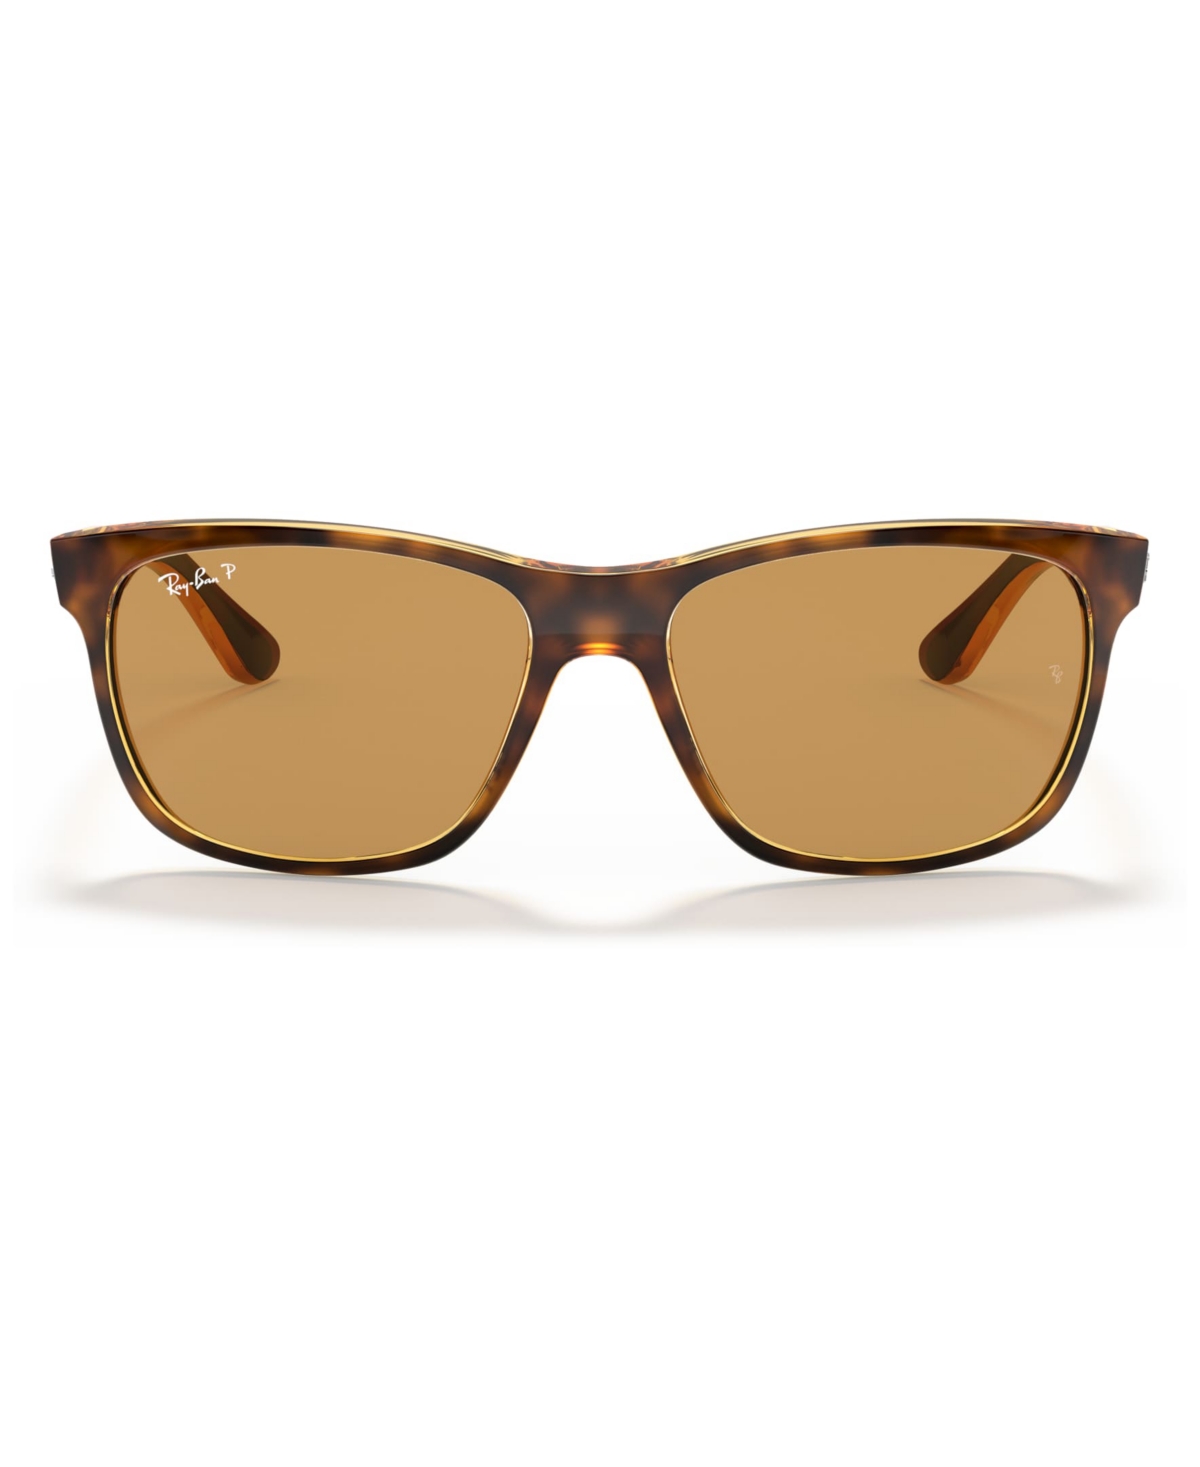 Ray Ban Polarized Sunglasses , Rb4181 In Yellow,brown